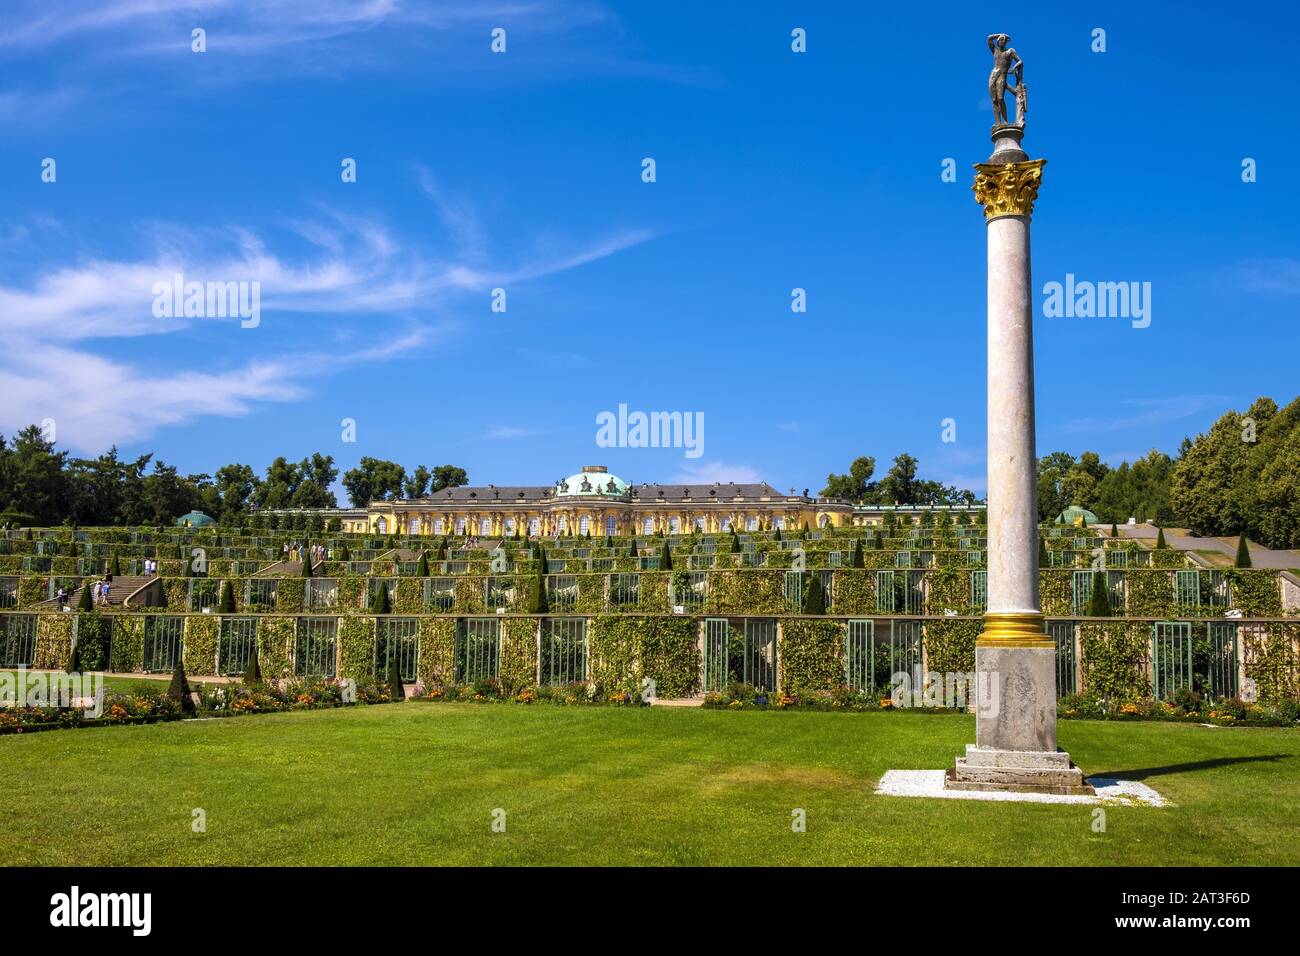 Potsdam, Brandenburg / Germany - 2018/07/29: Panoramic view of the Sanssouci summer palace and wine garden in the Sanssouci Park Stock Photo